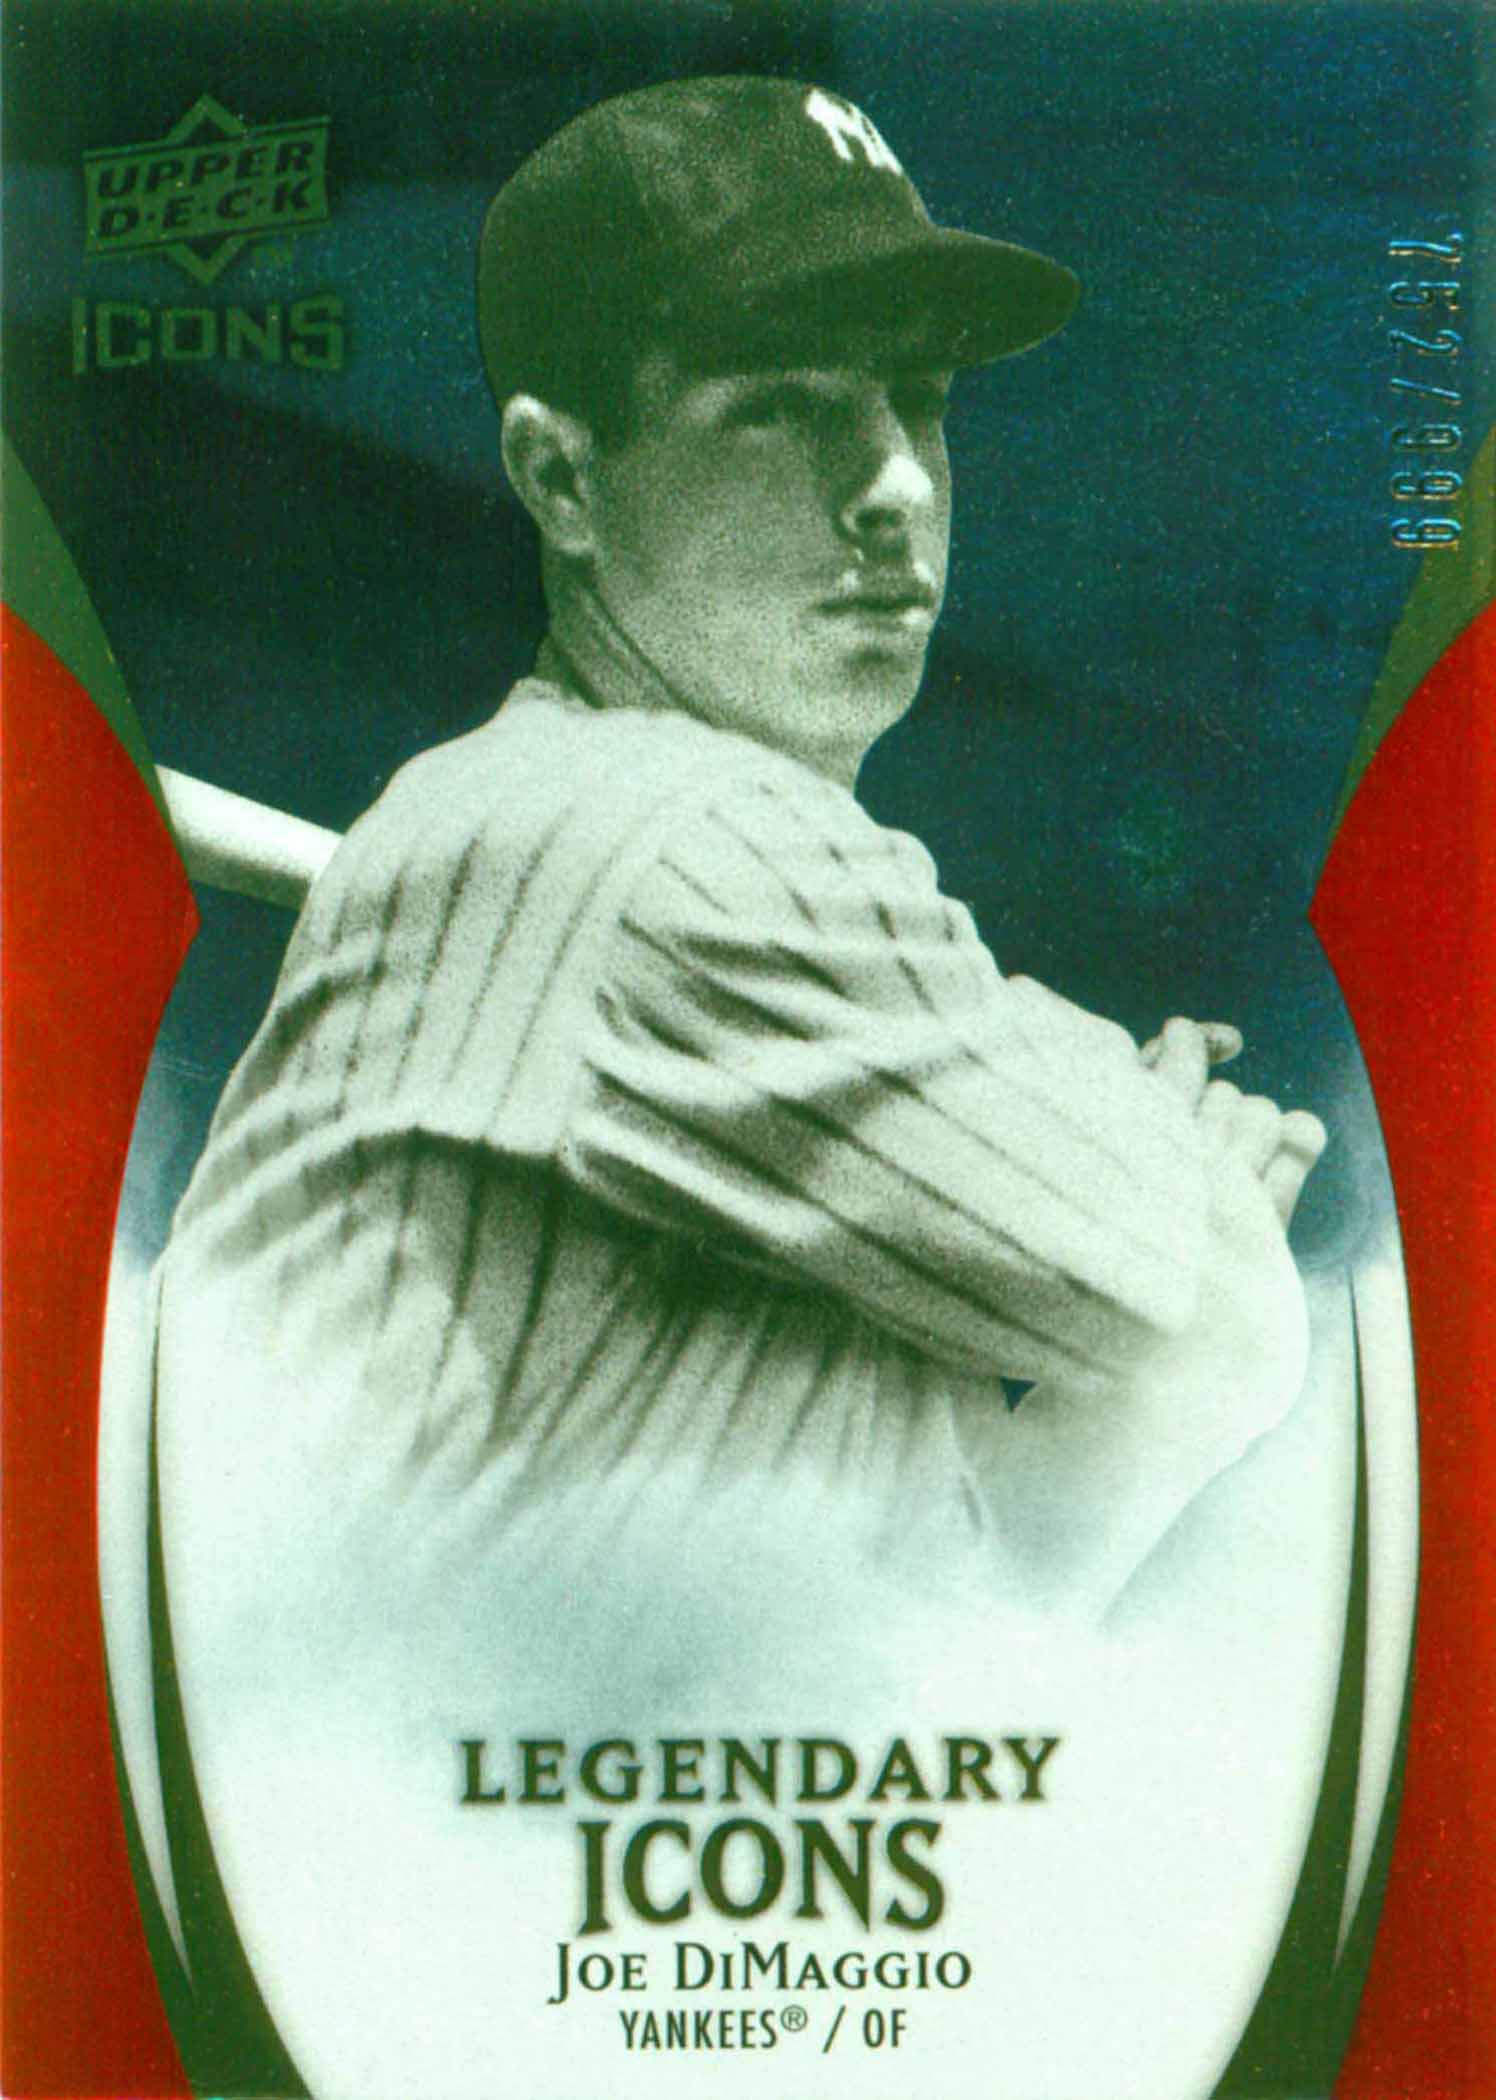 2009 Upper Deck Icons Legendary Icons